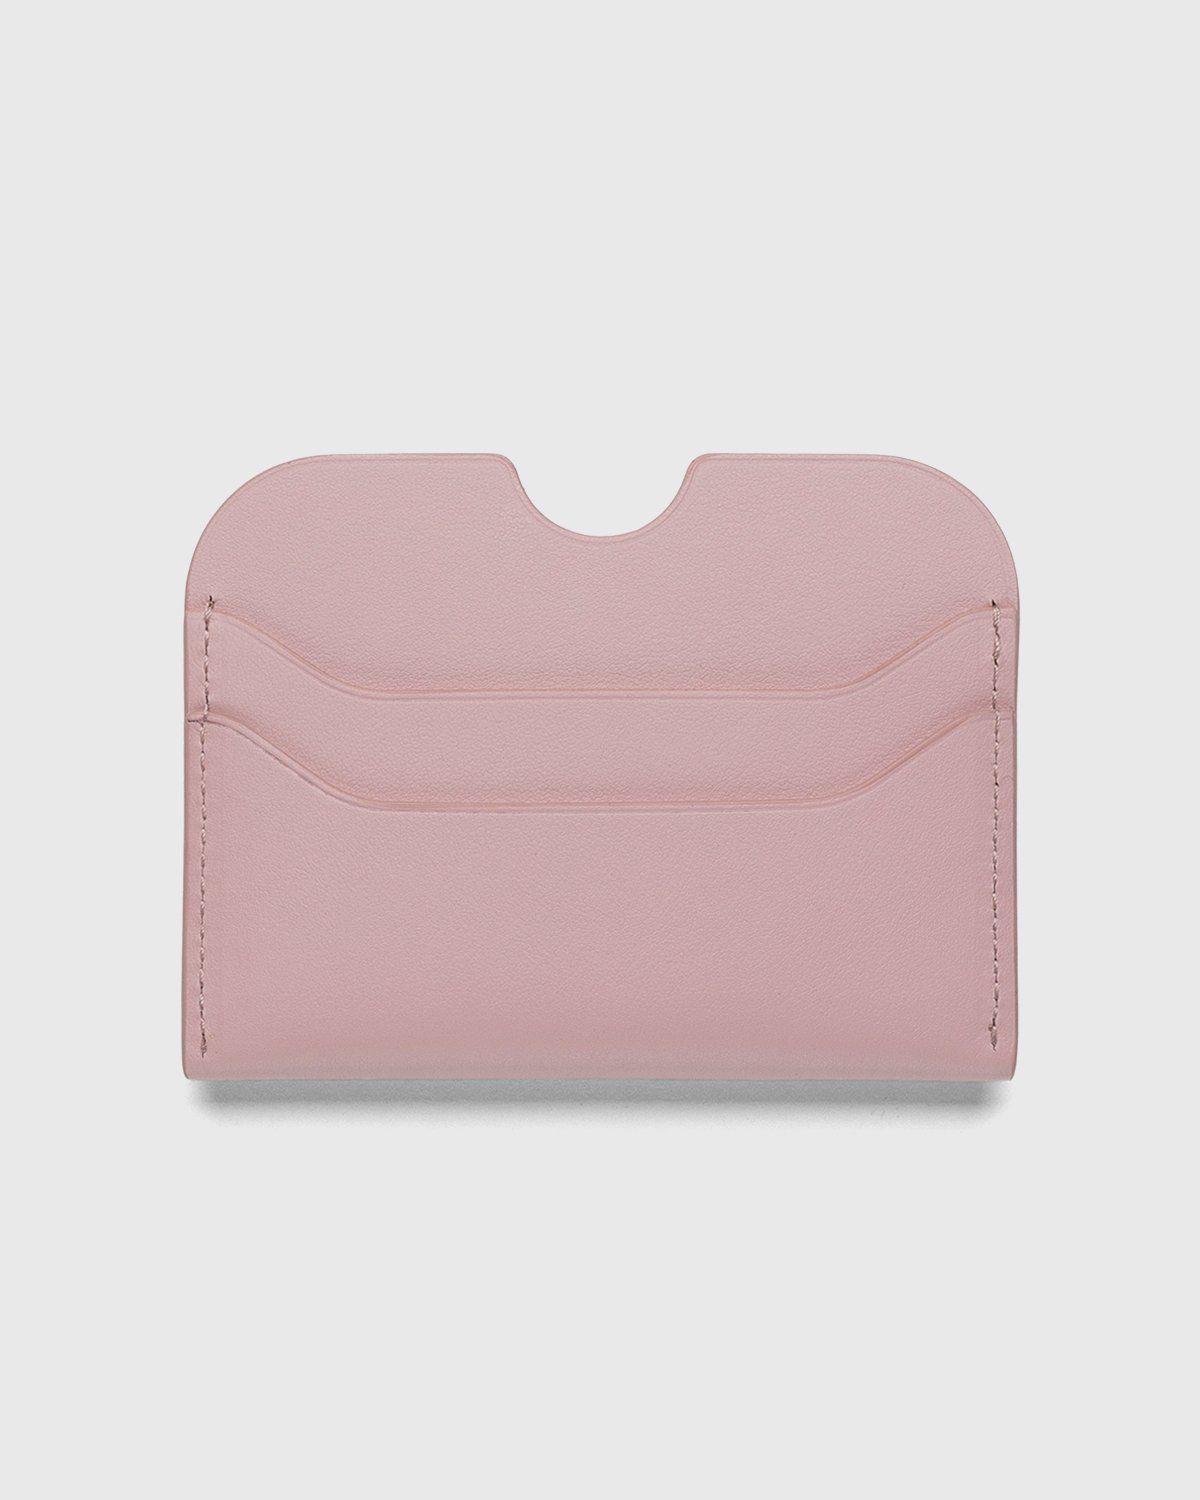 Acne Studios – Leather Card Case Powder Pink - Image 2